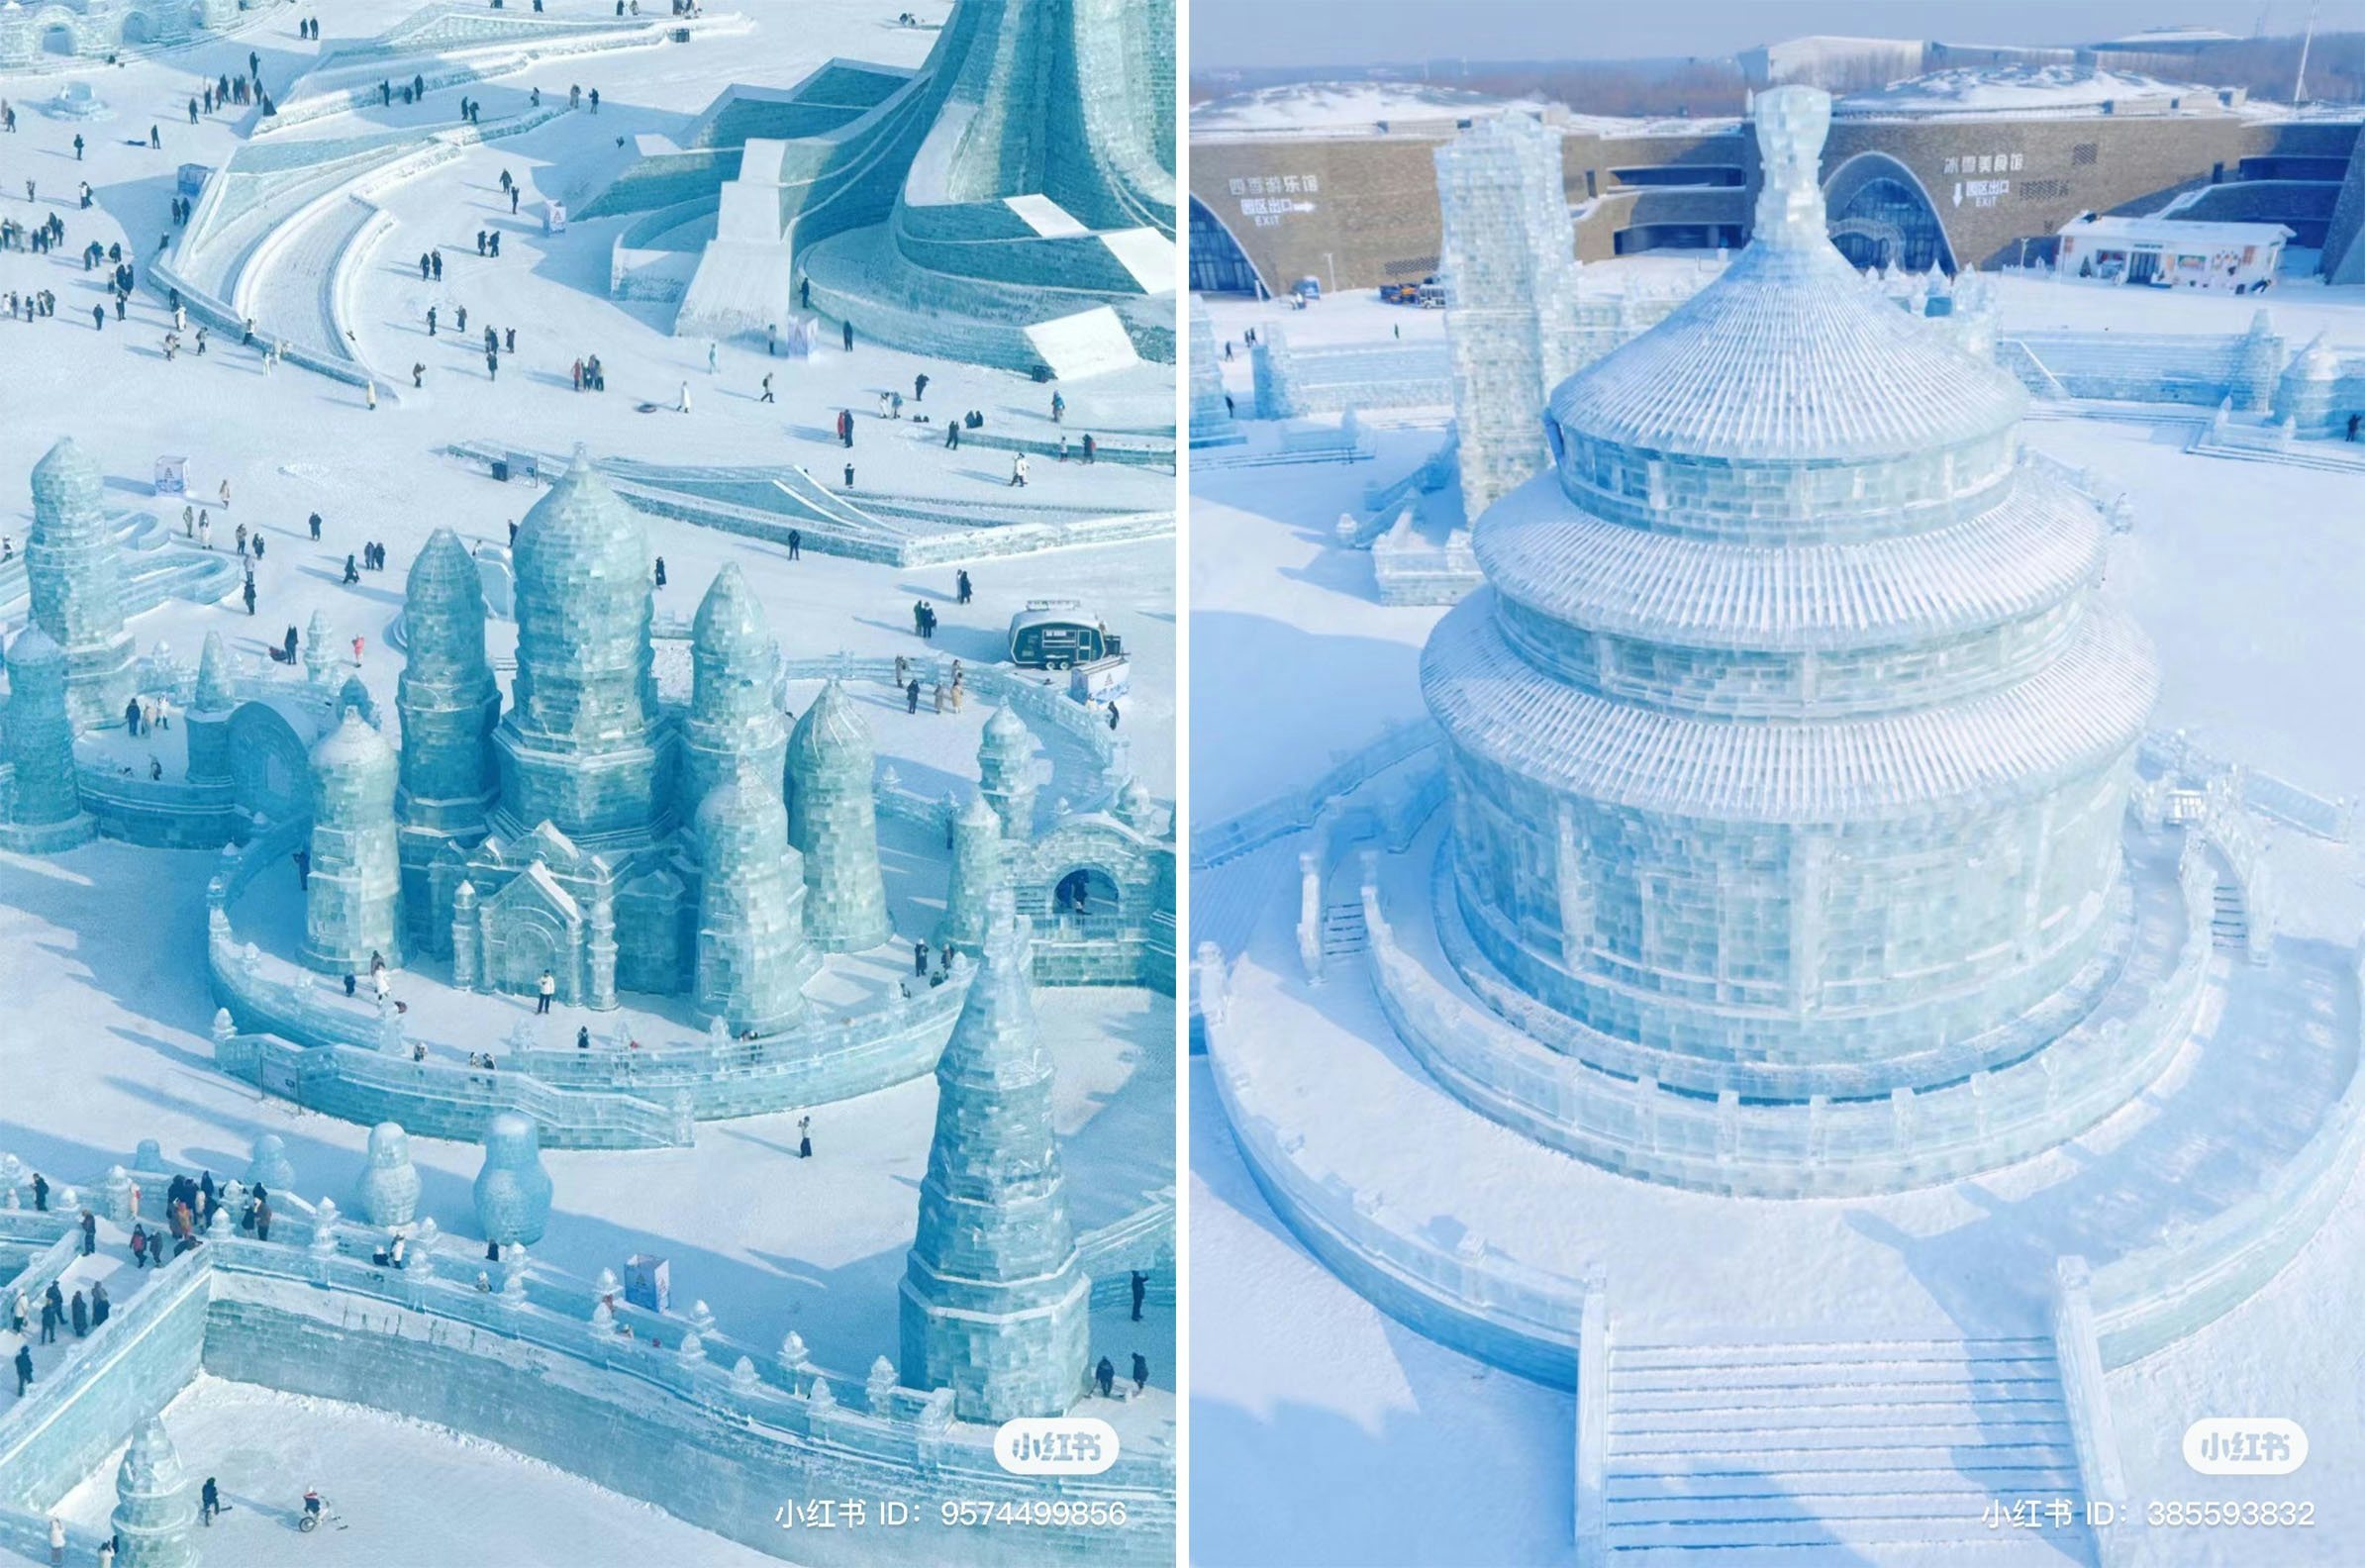 Ice sculptures take the form of iconic global buildings, such as Beijing's Temple of Heaven (right). Photo: Xiaohongshu